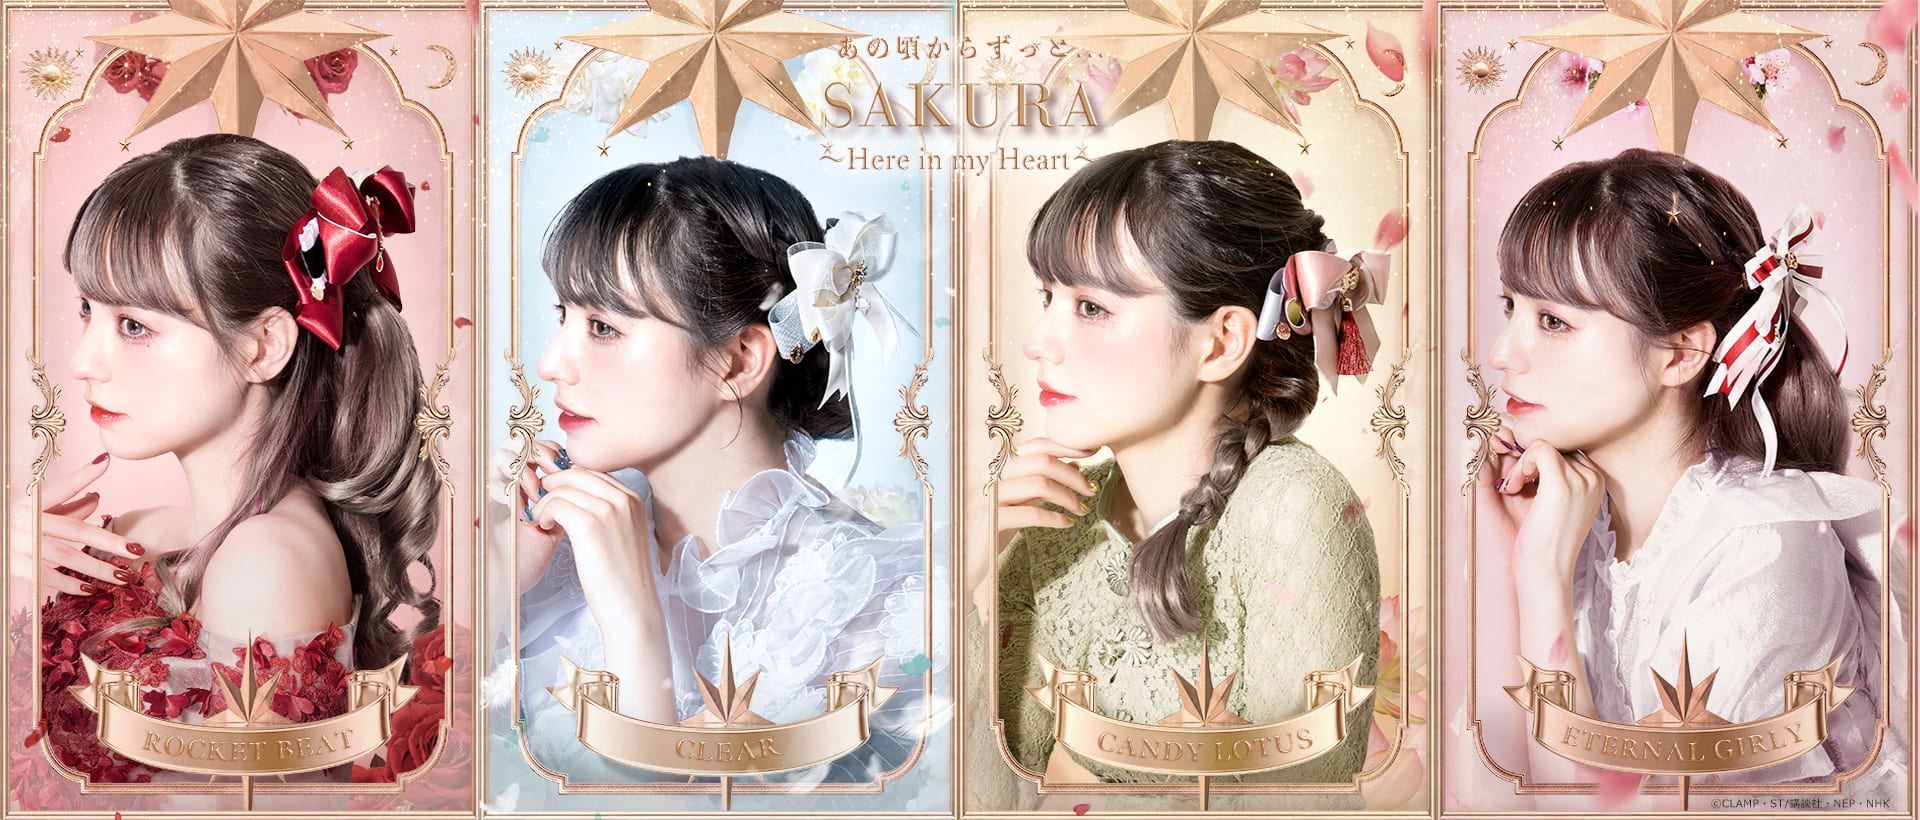 Cardcaptor Sakura x Mayla Classic 3rd series is hair accessories! Lineup includes 4 types